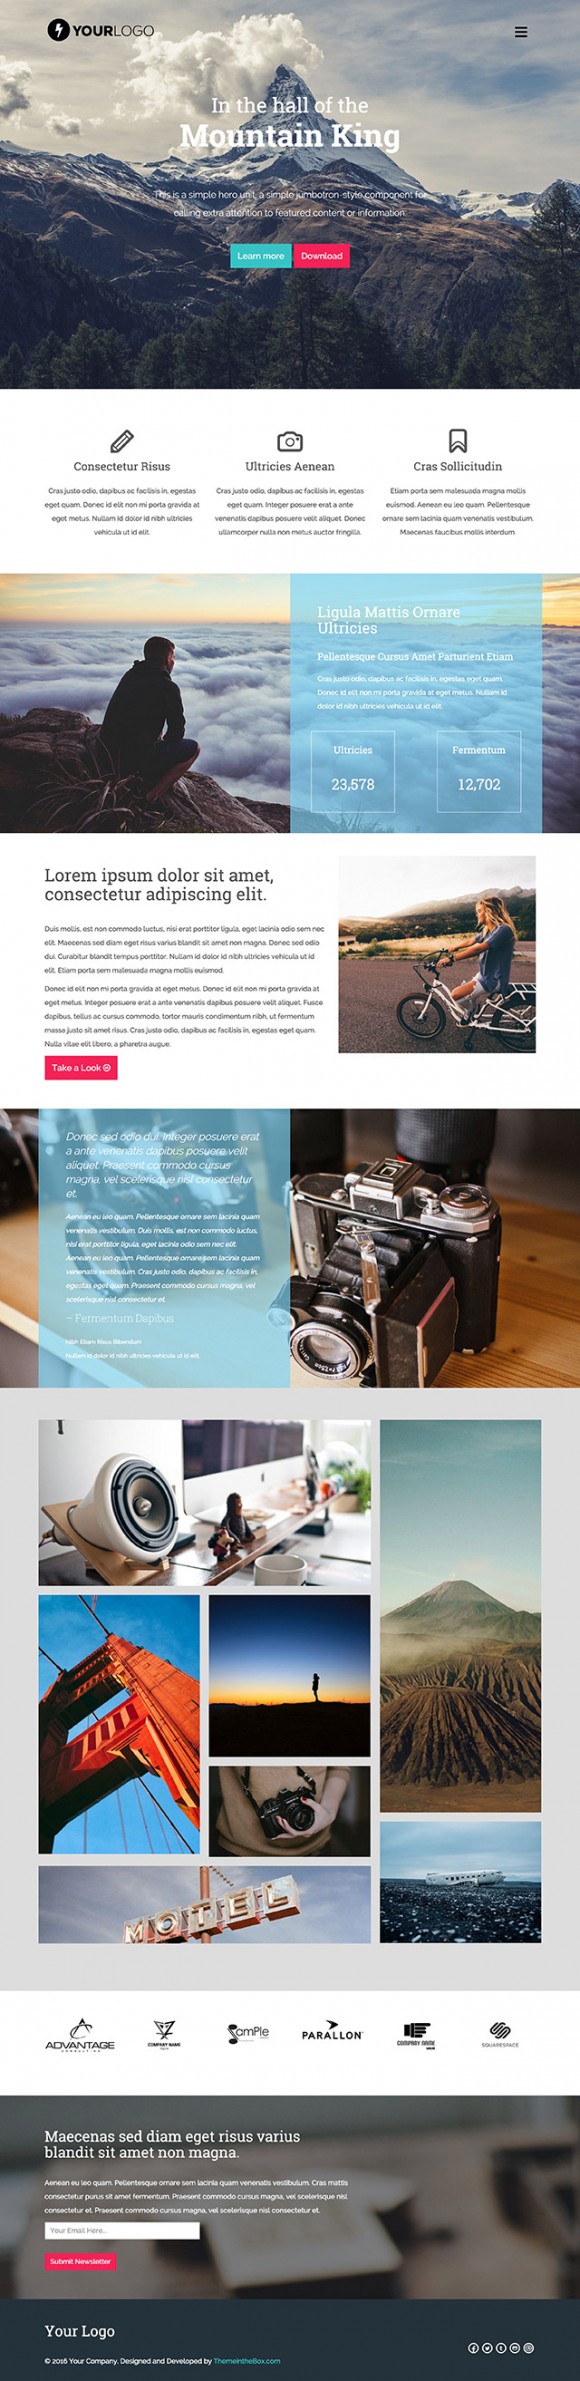 Mountain King: HTML Bootstrap template - Full image